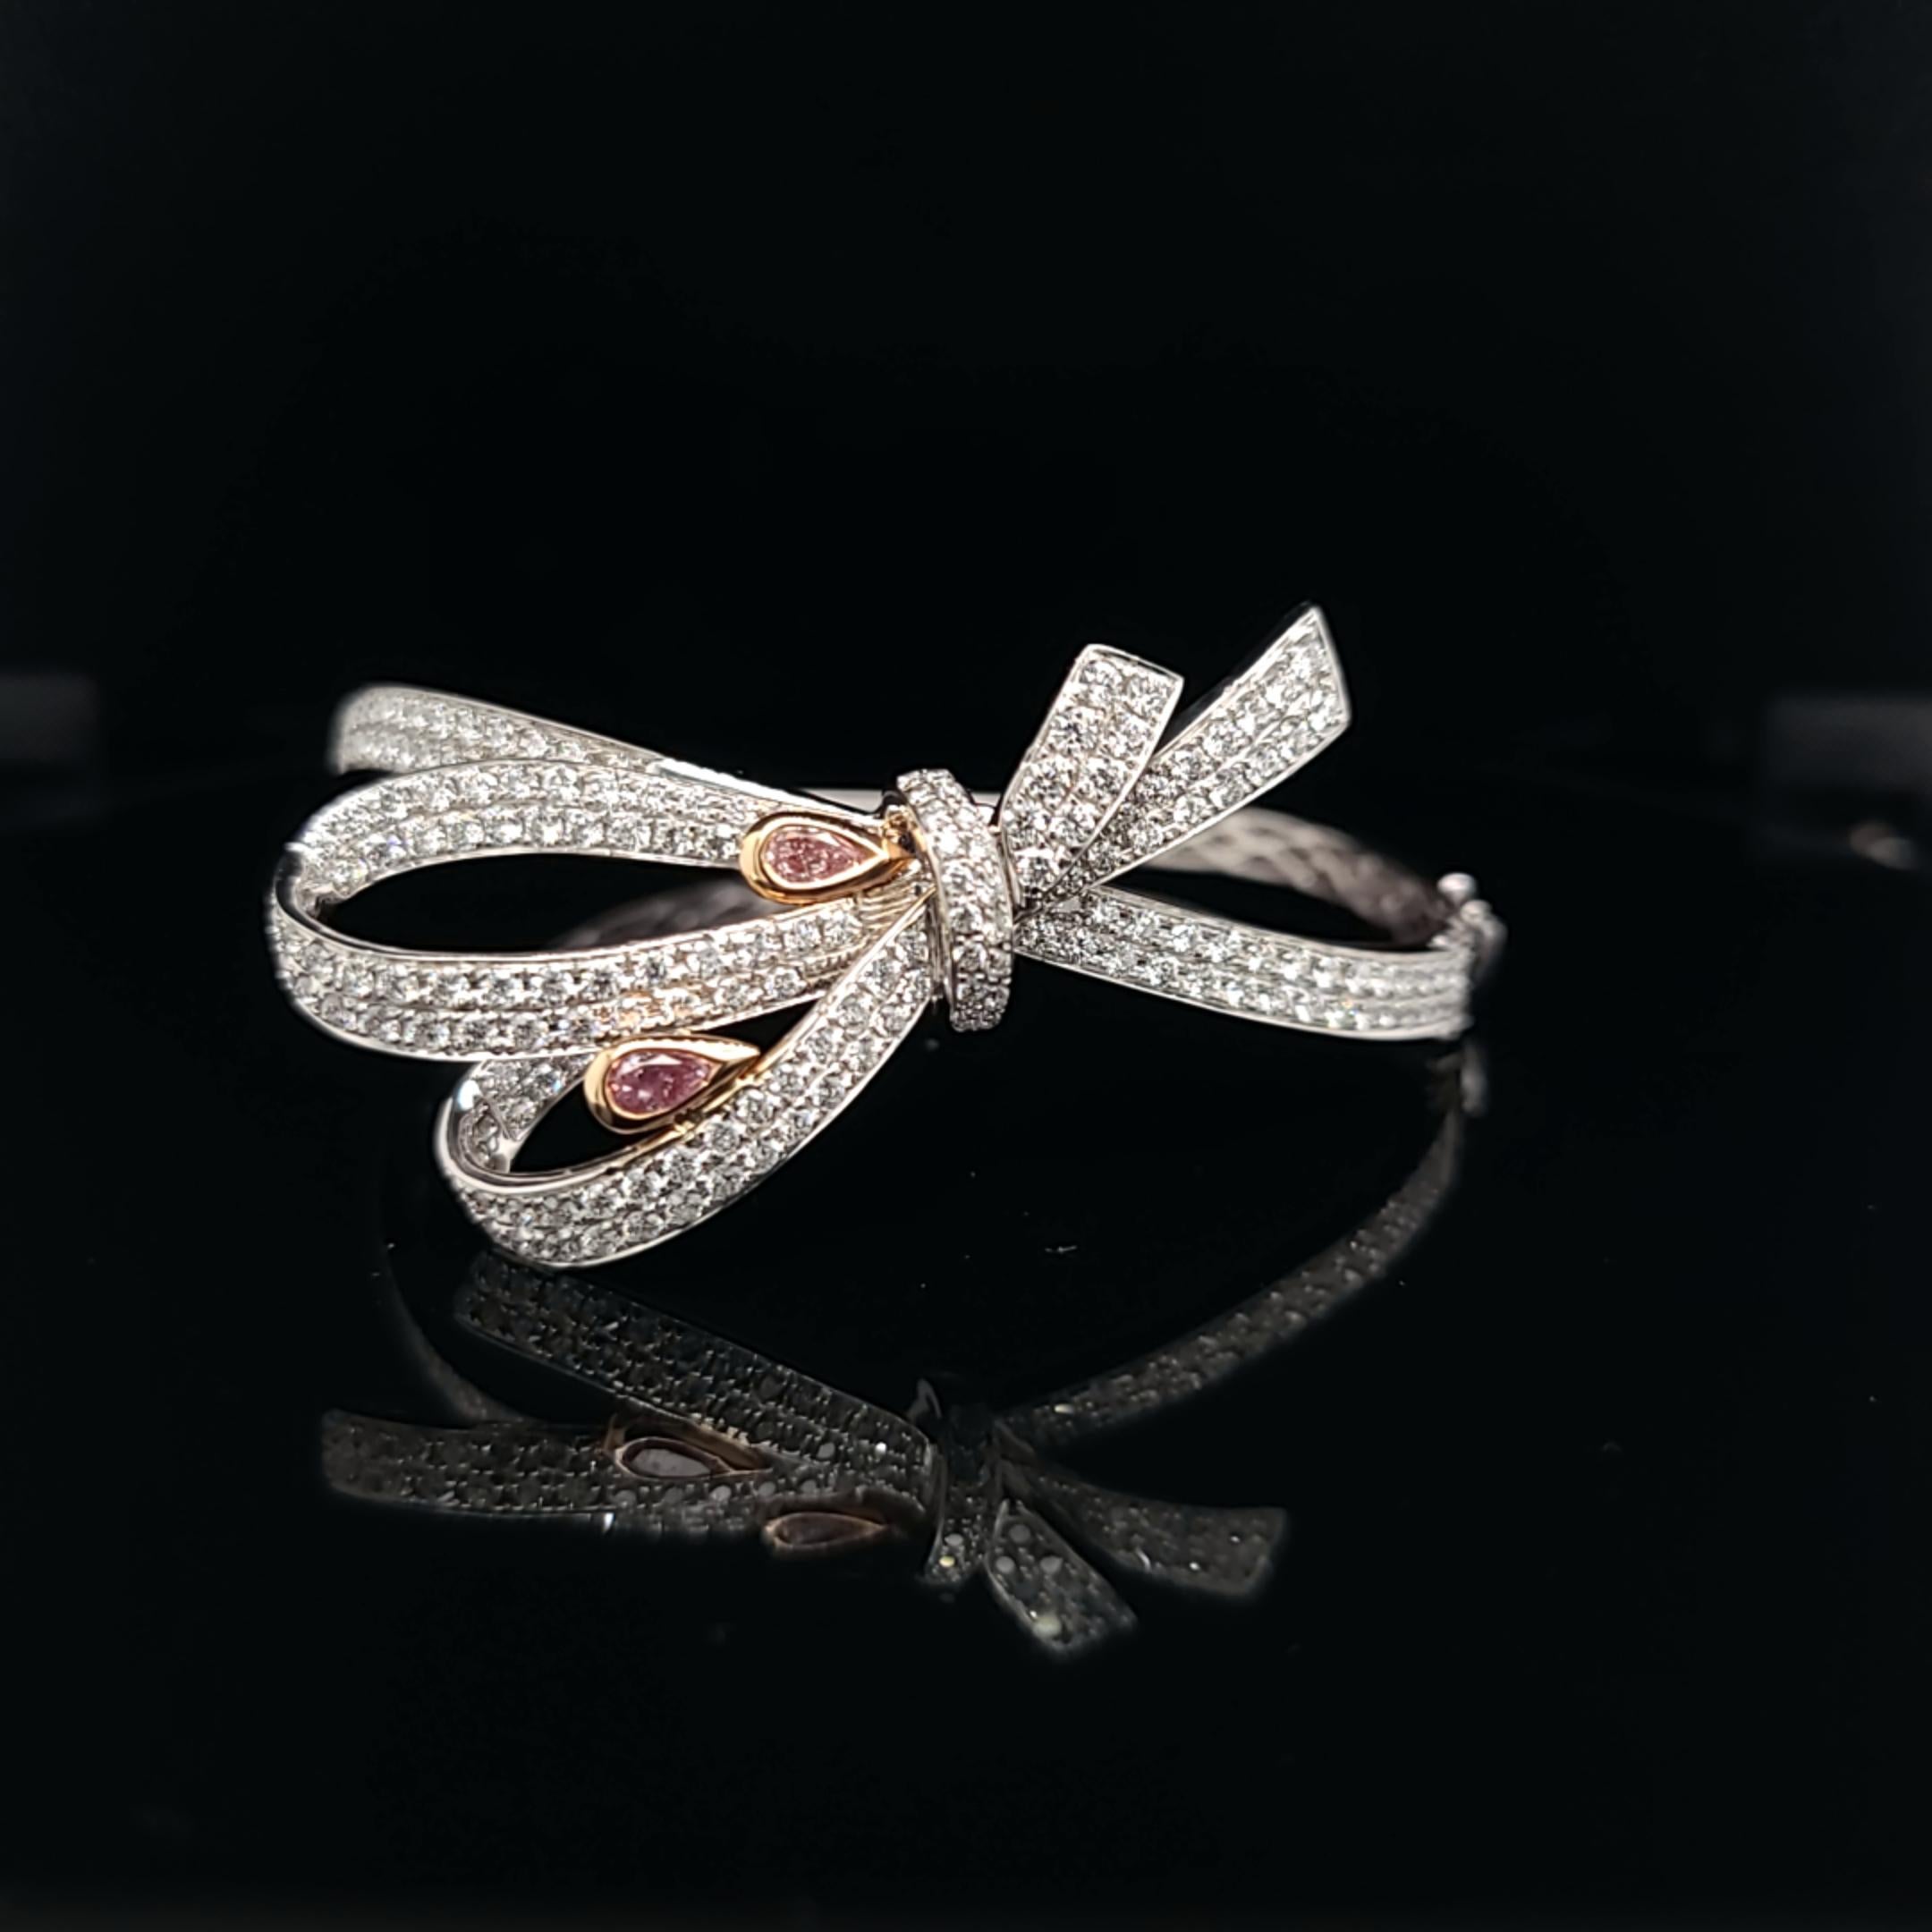 Bow bracelet featuring 0.46 carats of pink diamonds and 2.80 carats white diamonds set in 18k rose and white gold. 